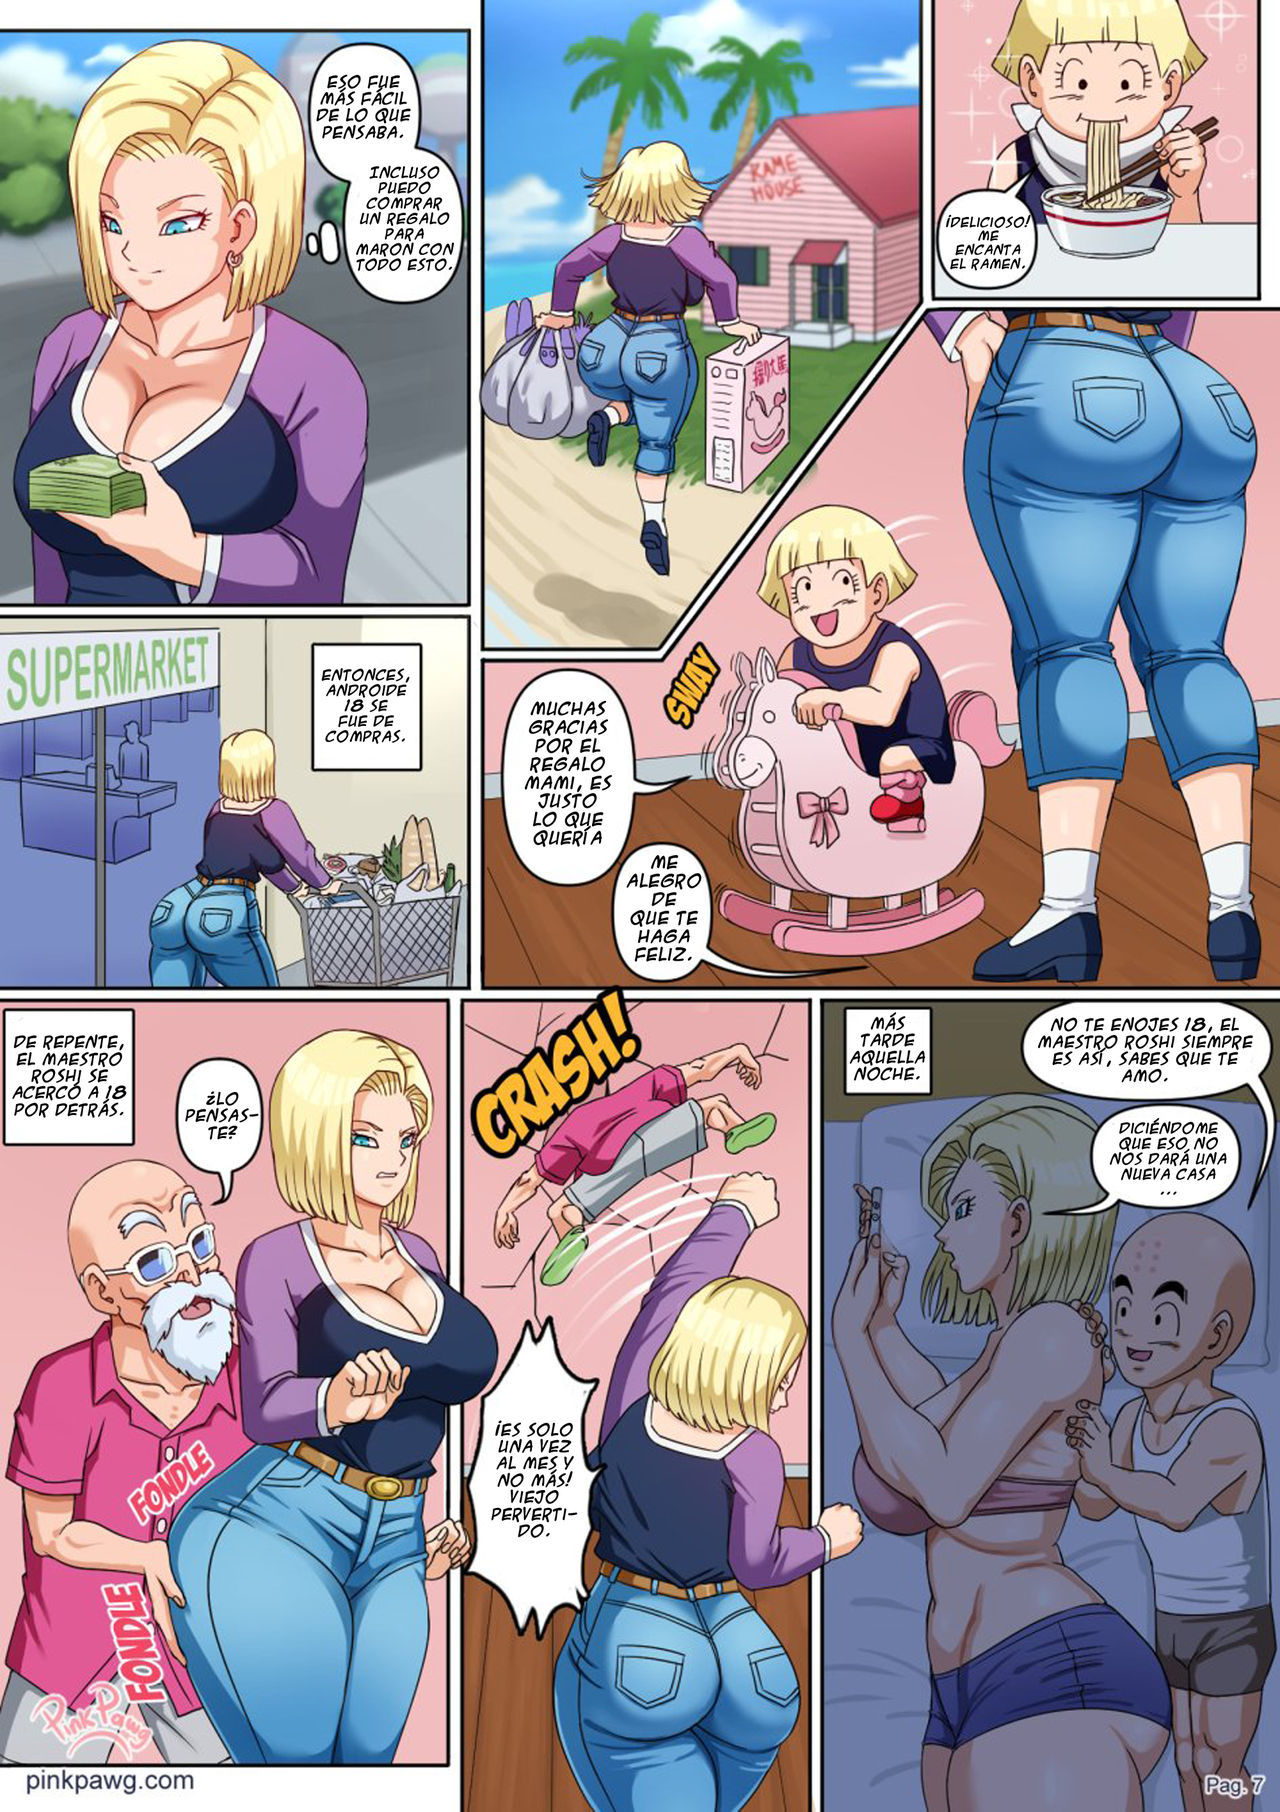 [Pink Pawg] Android 18 NTR Ep.4 (Dragon Ball Super) [Spanish] [Rin_Breaker] [Incomplete]